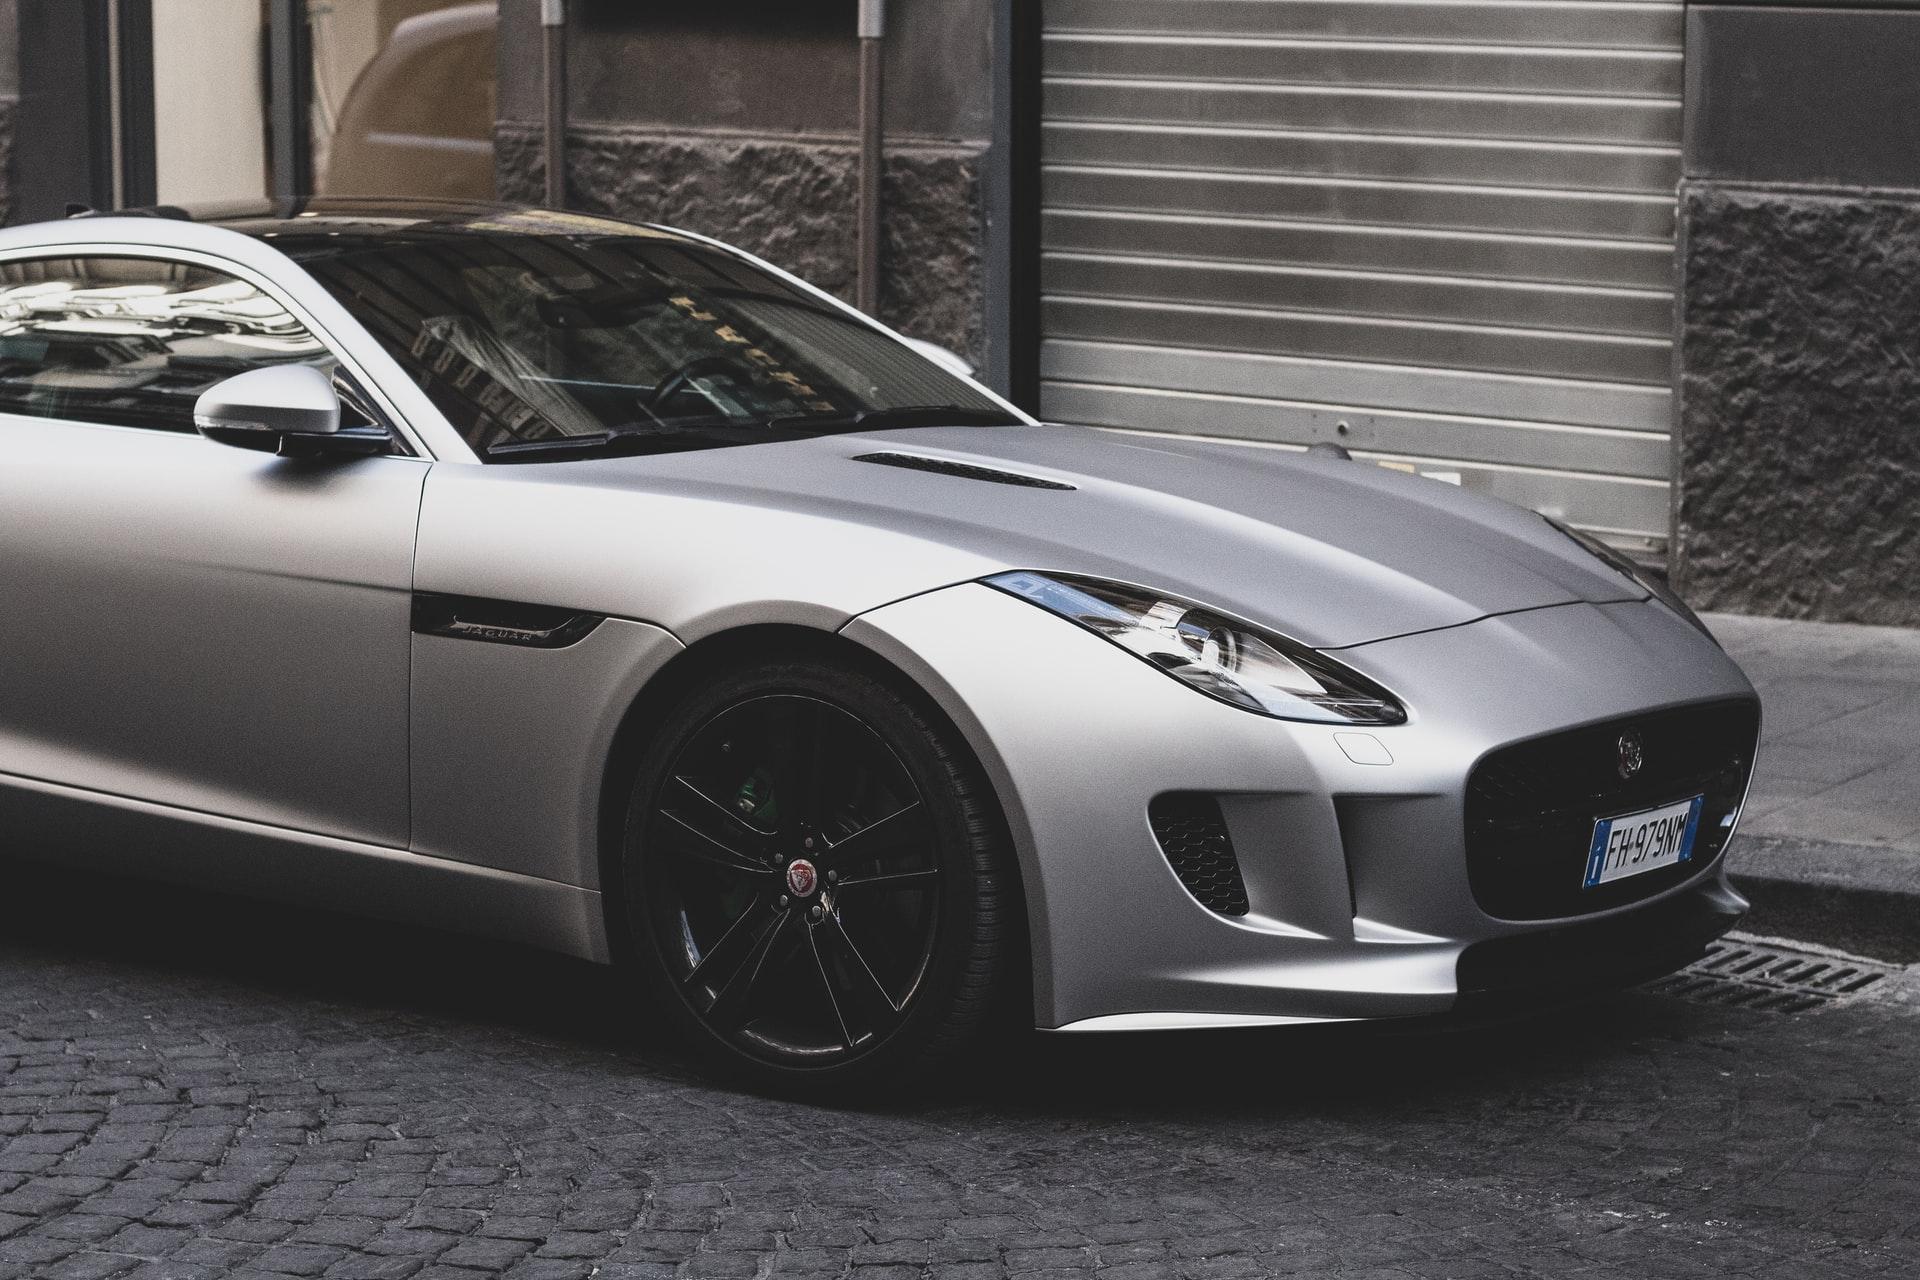 Jaguar is known for producing fast cars, but which are the most fuel-efficient?